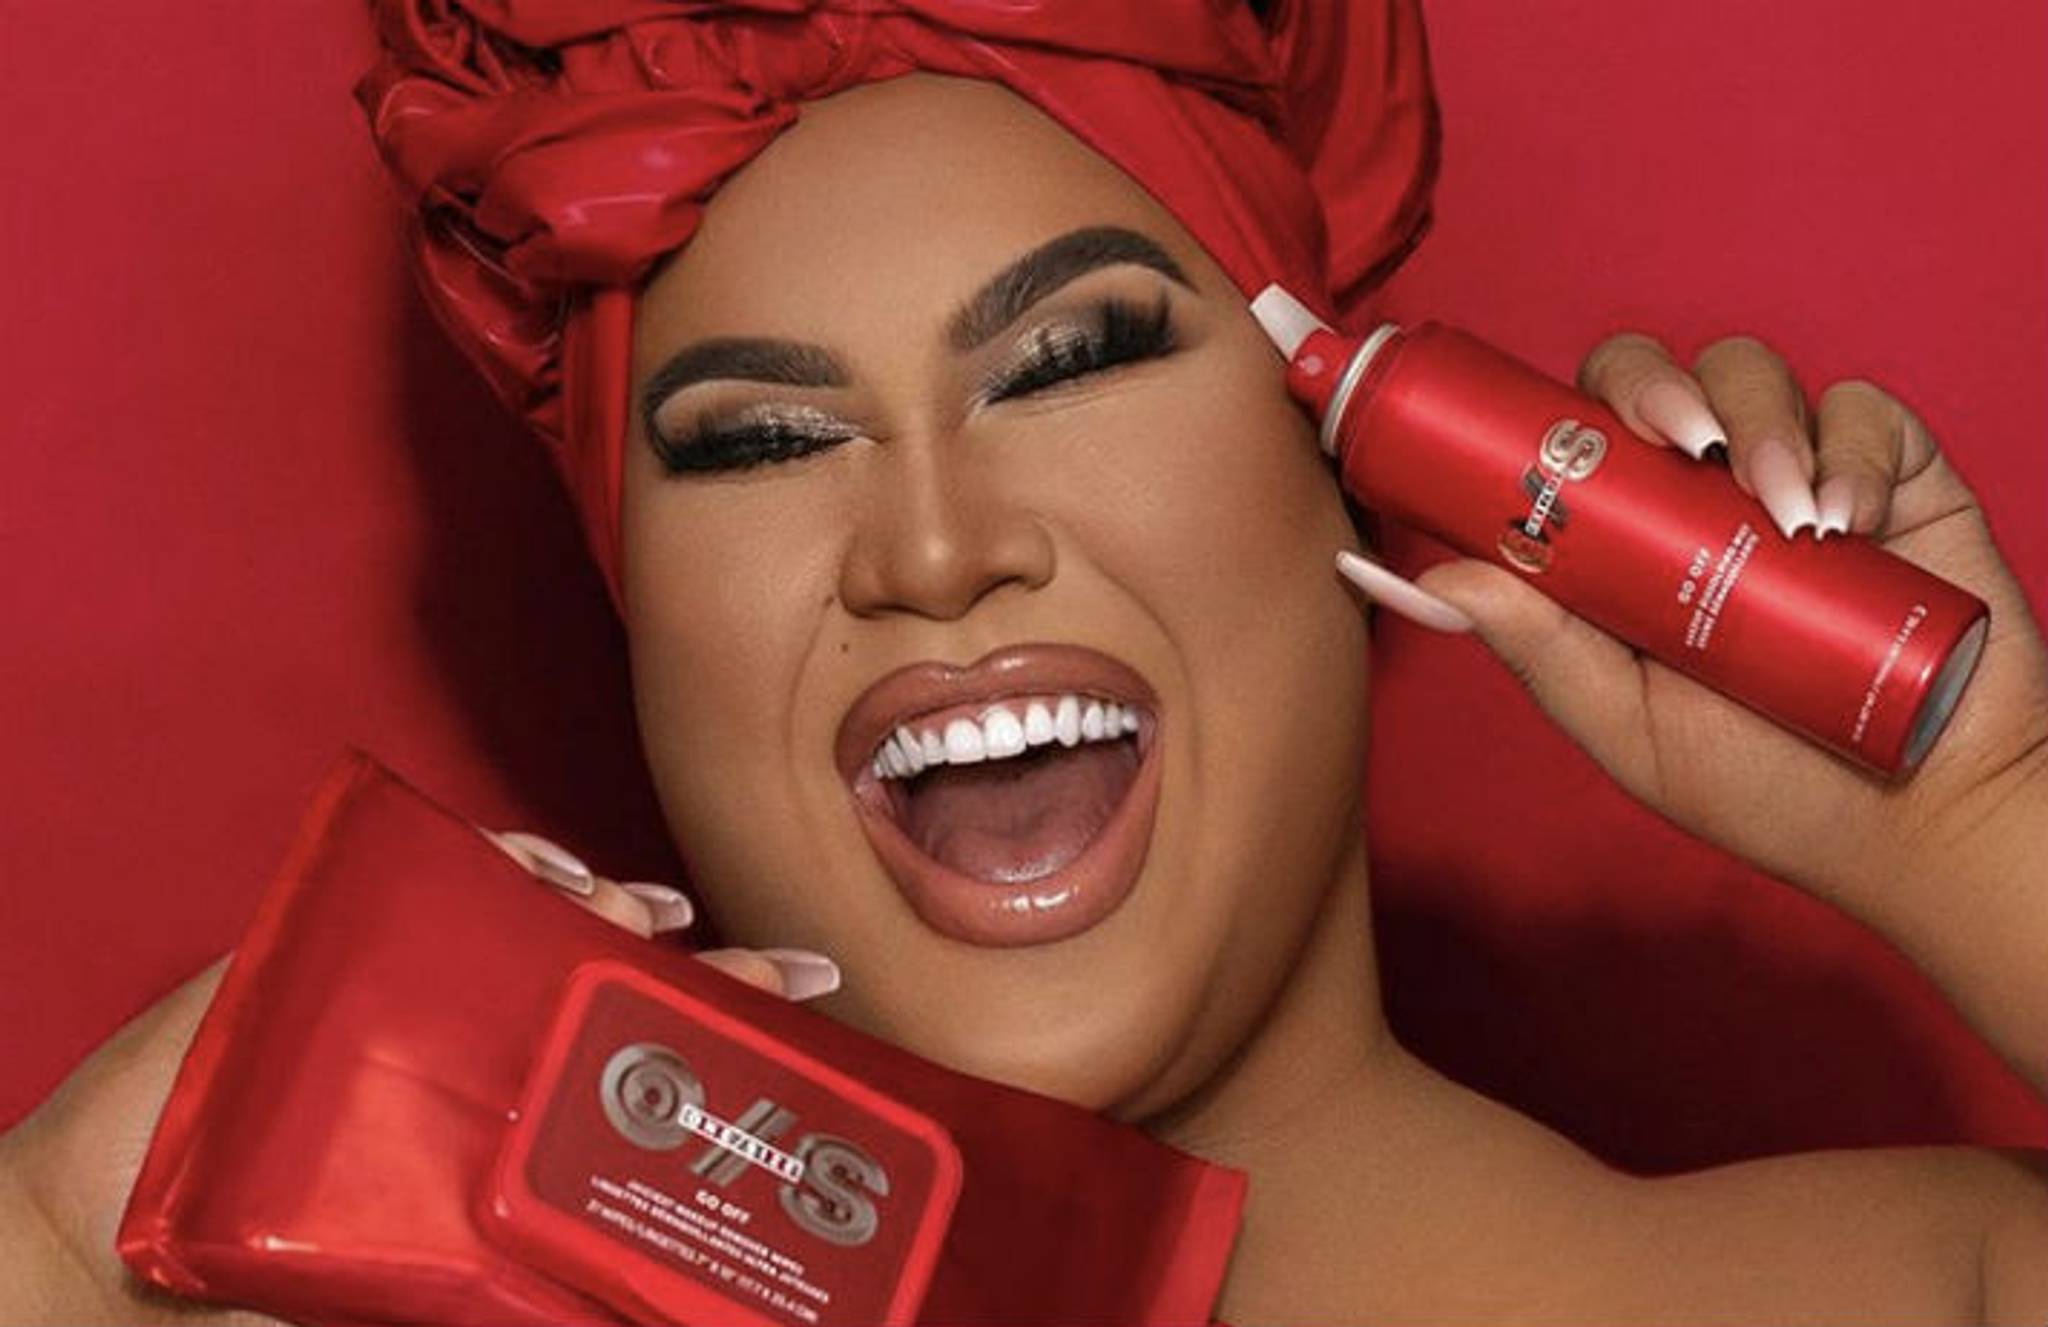 ONE/SIZE beauty champions gender-inclusive make-up